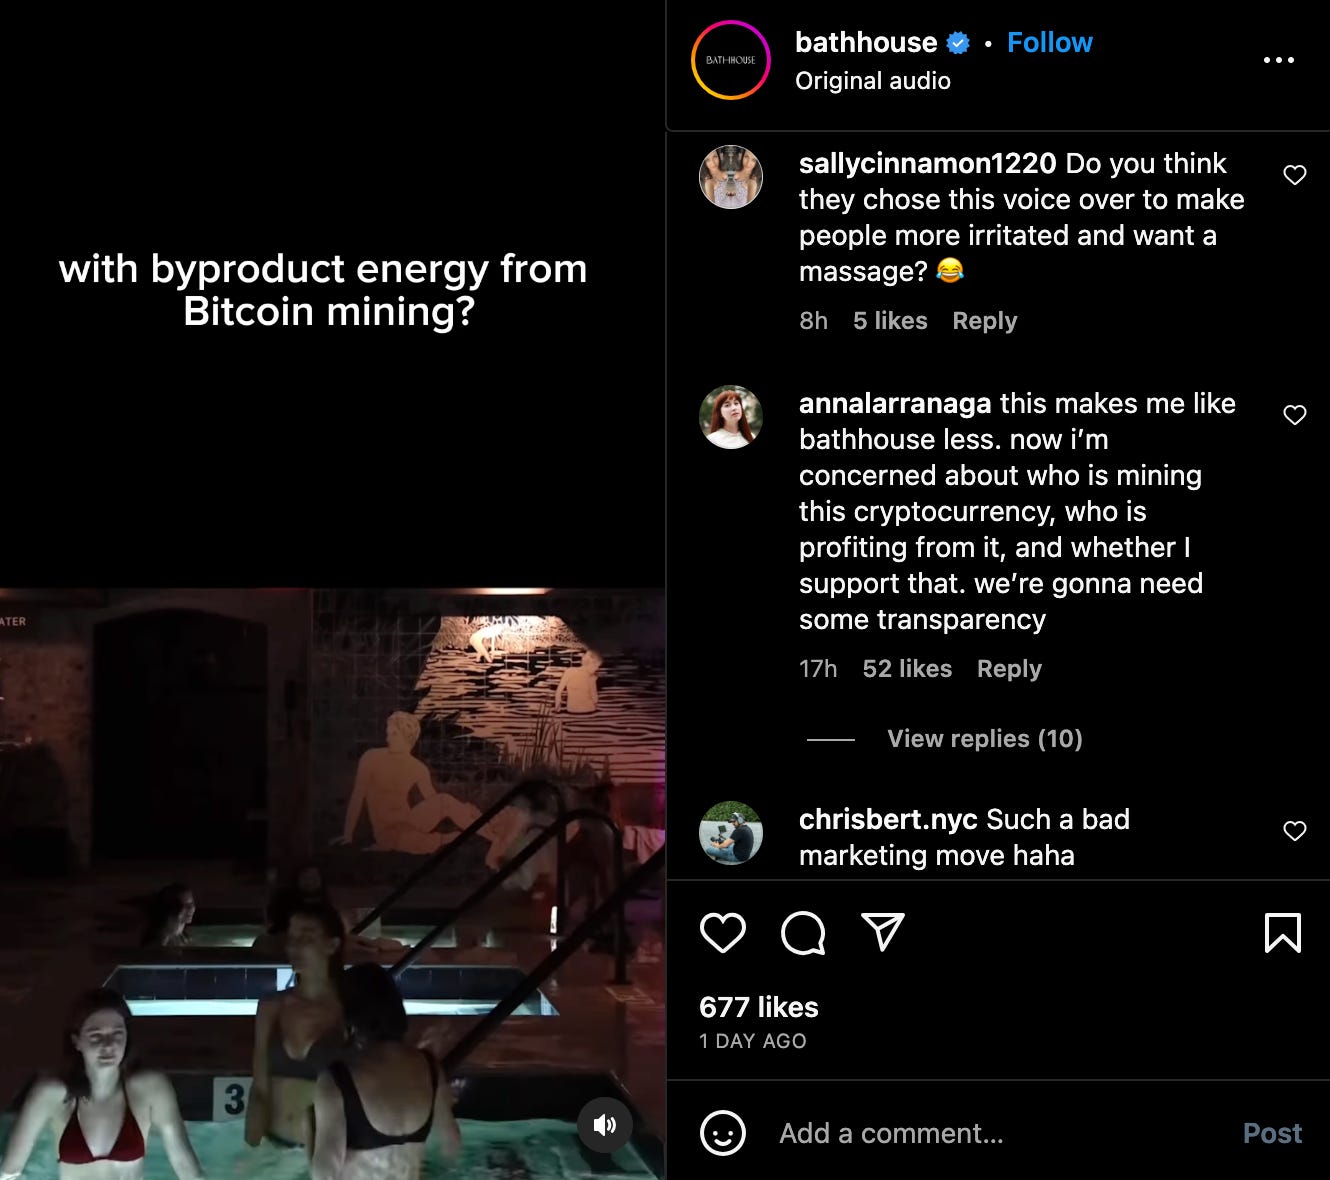 Screenshot from the Bathhouse Instagram post about heating their pools with Bitcoin mining, alongside comments like “Do you think they chose this voice over to make people more irritated and want a massage?” “his makes me like bathhouse less. now i’m concerned about who is mining this cryptocurrency, who is profiting from it, and whether I support that. we’re gonna need some transparency,” and “Such a bad marketing move haha”